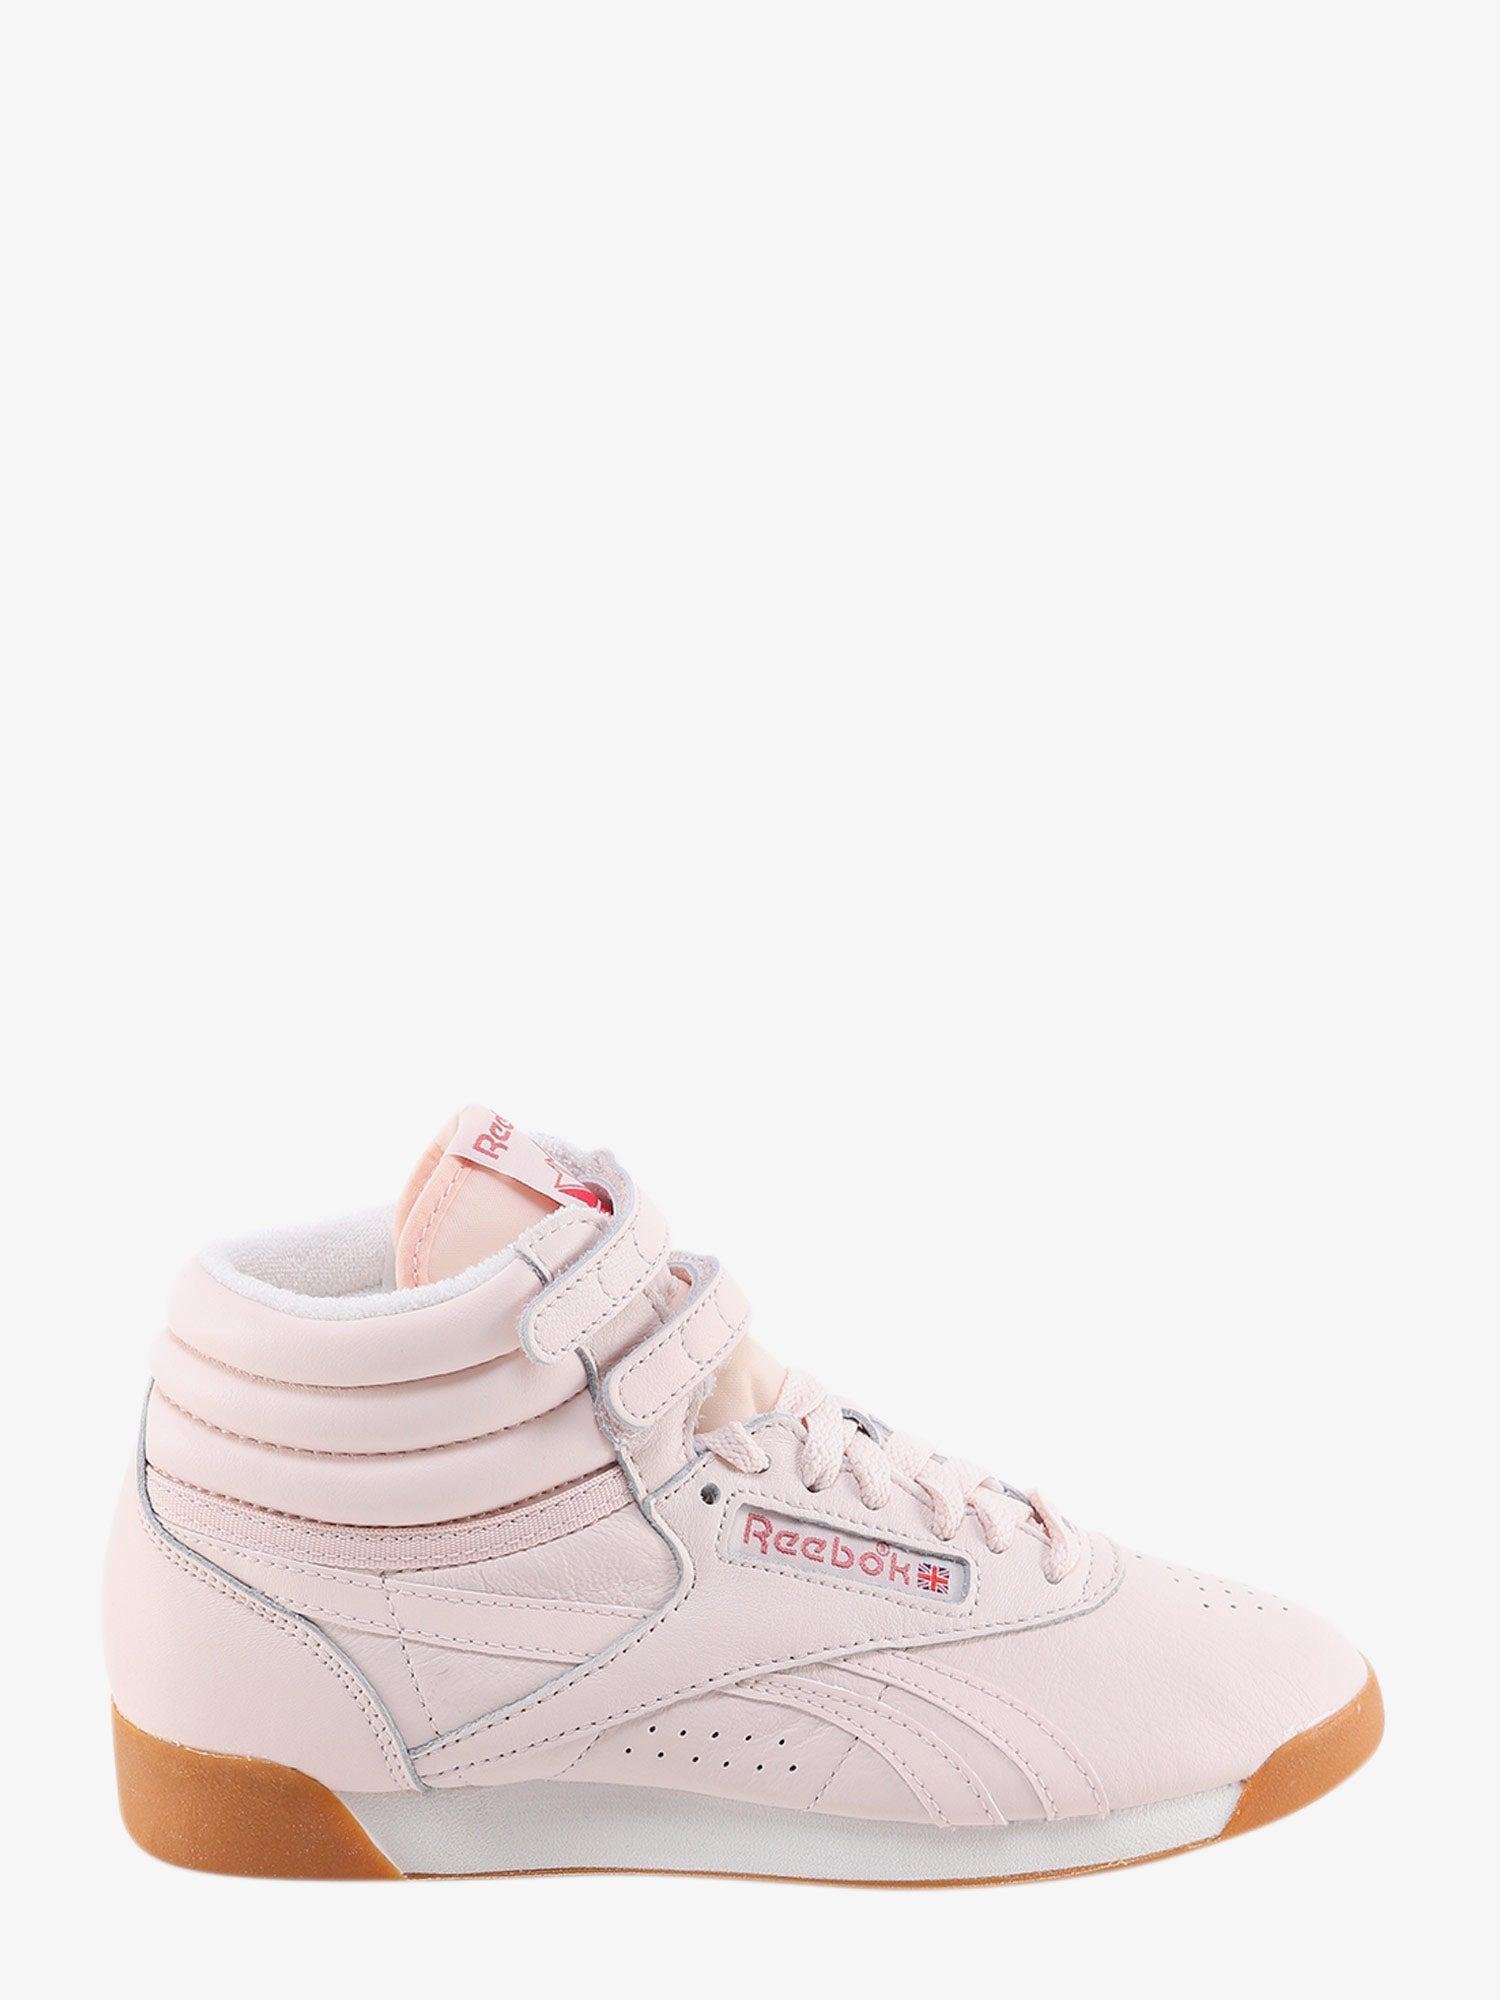 Reebok Leather Lace-up Sneakers in Pink | Lyst